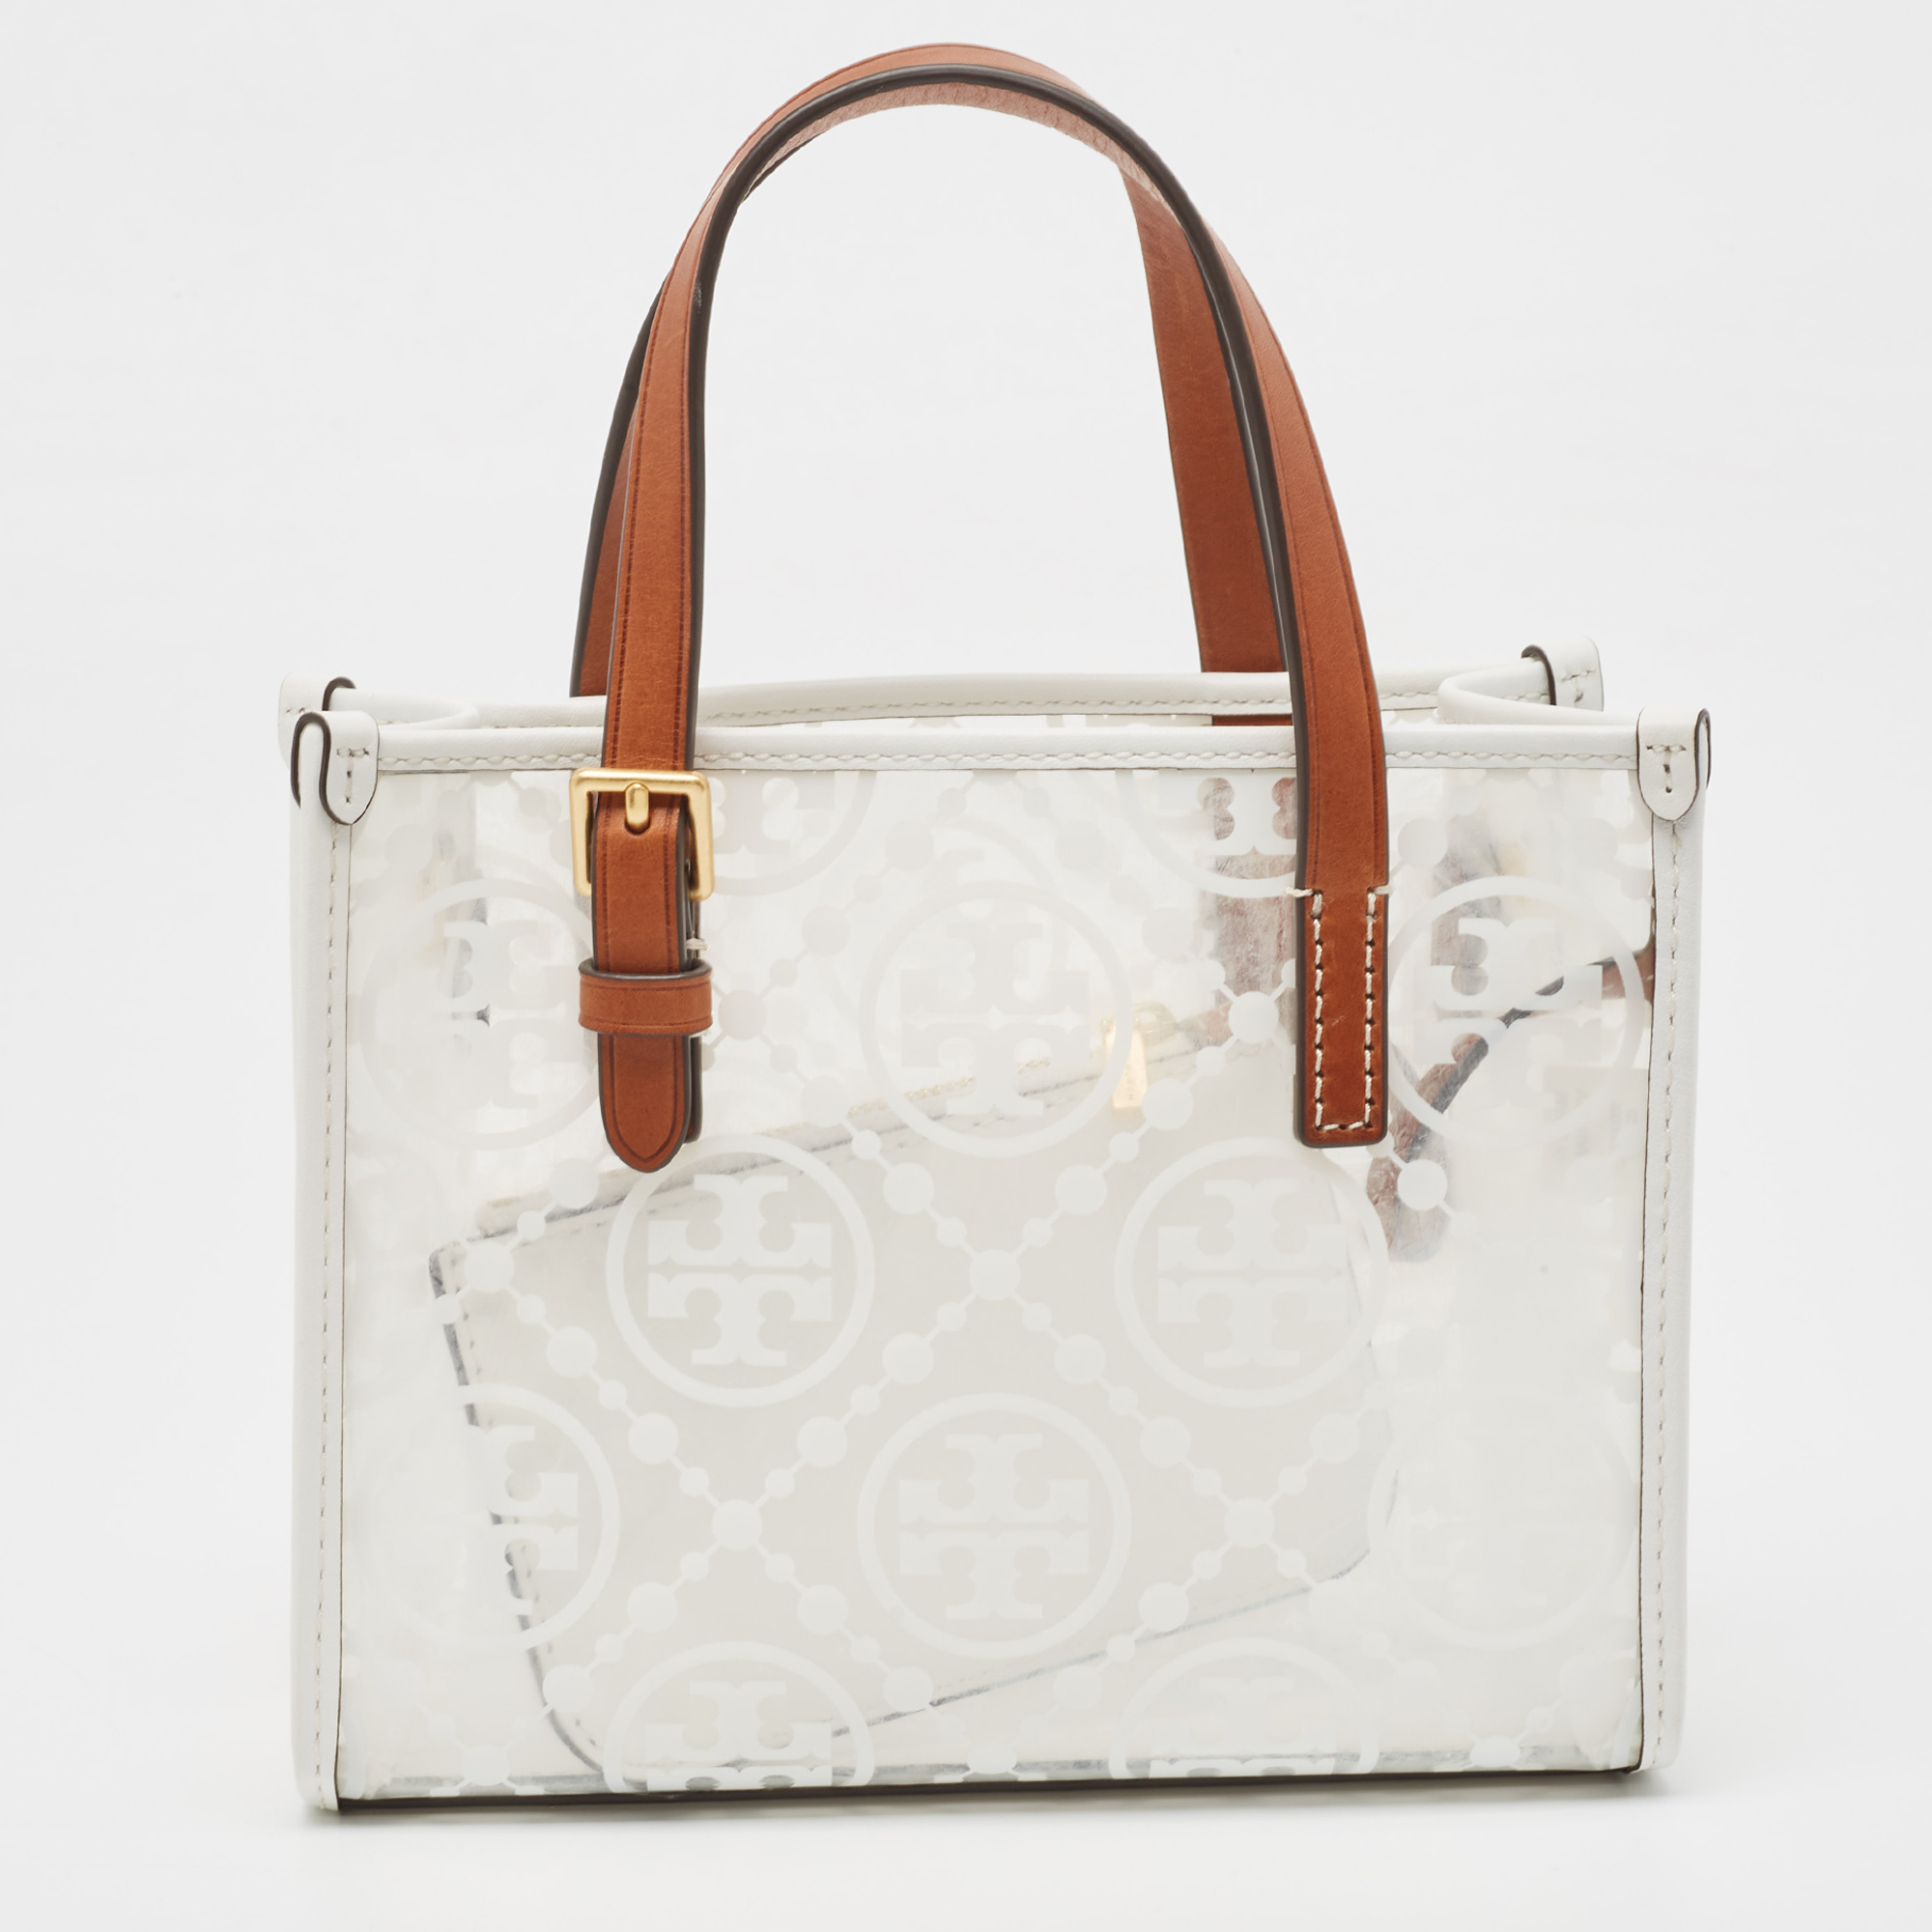 Tory Burch White/Tan Signature PVC And Leather Tote